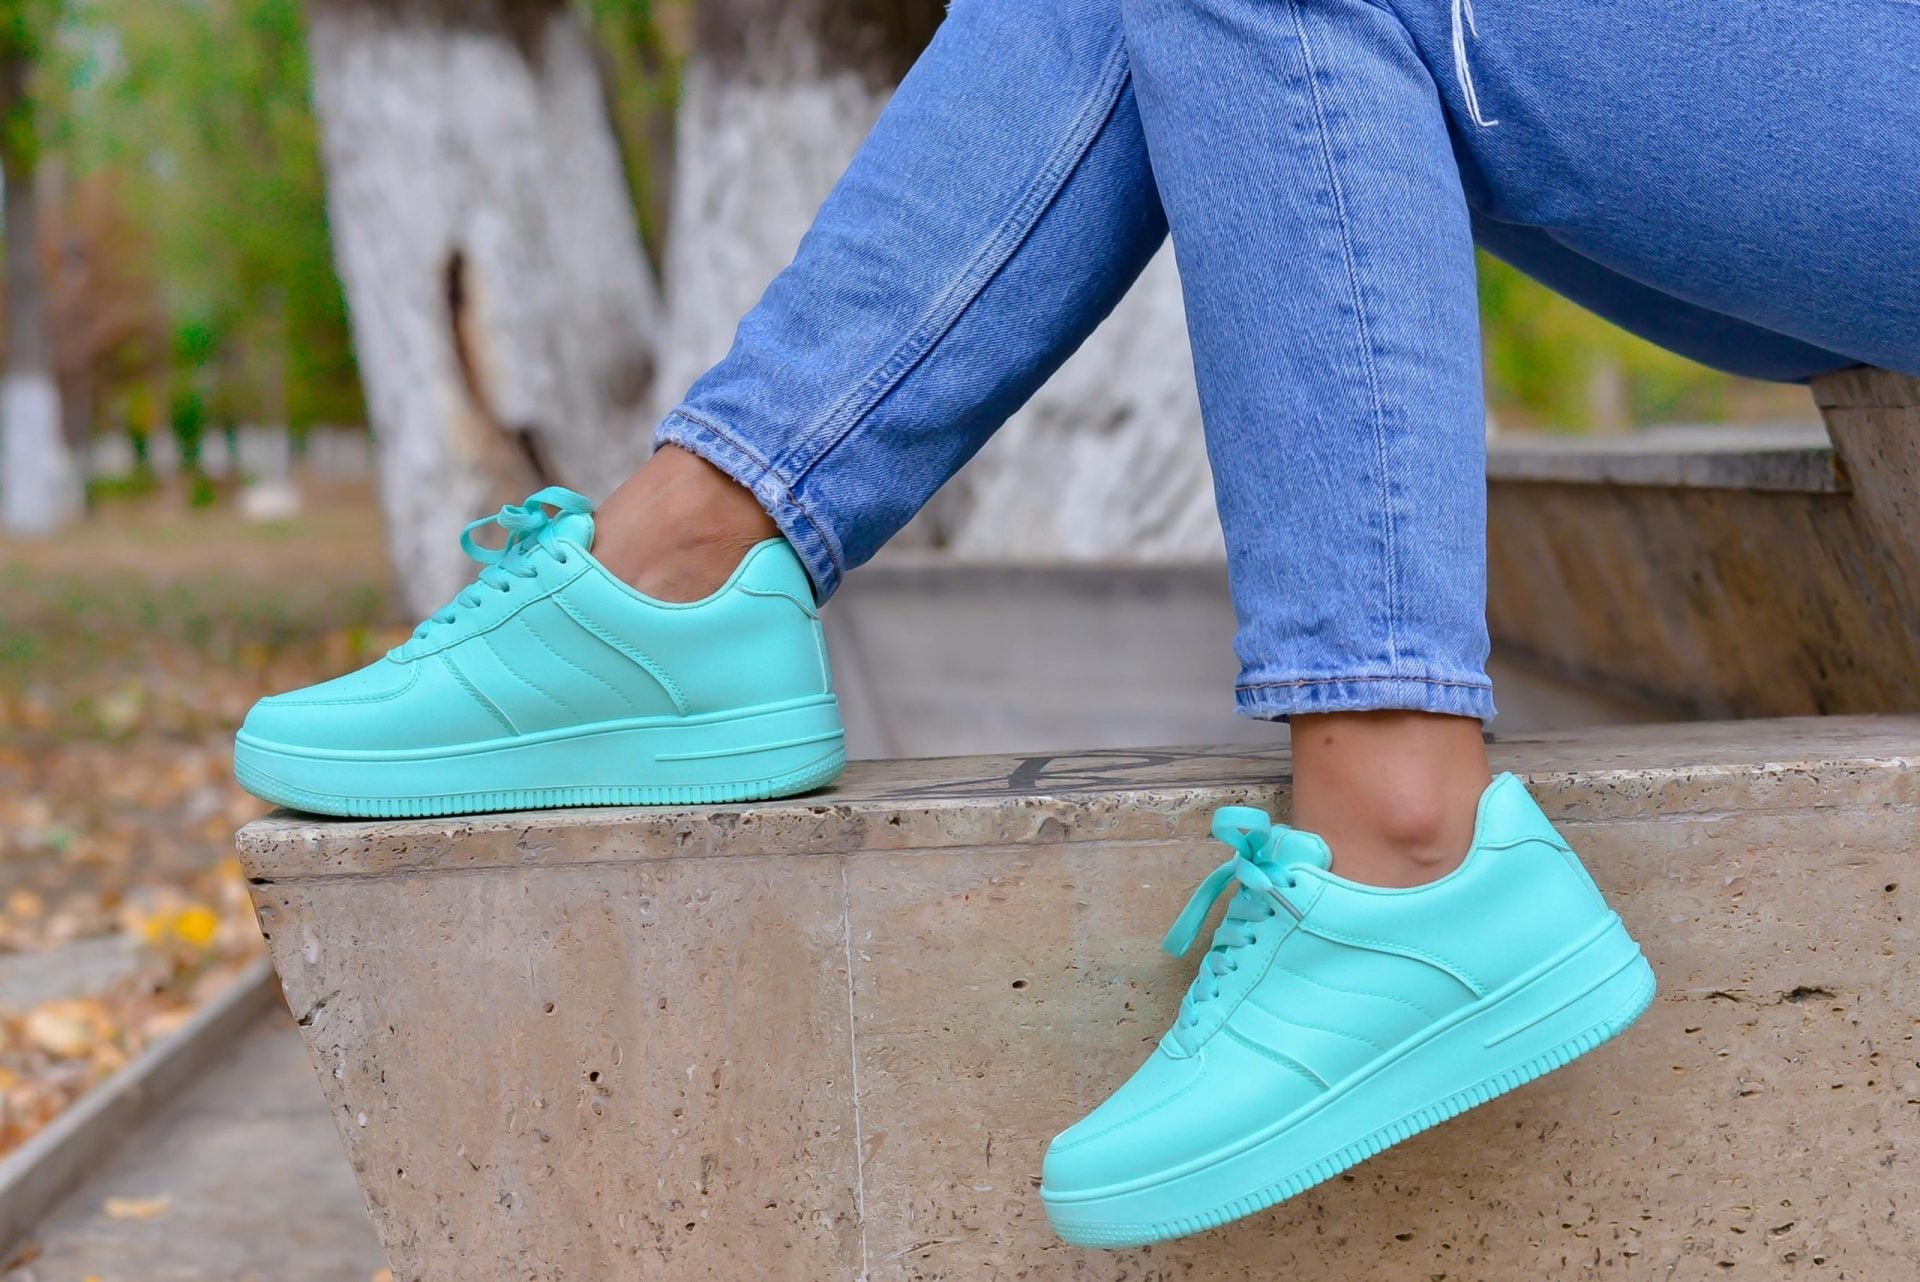 Women's Turquoise Esmeralda Basketball Shoes Made of Ecological Leather